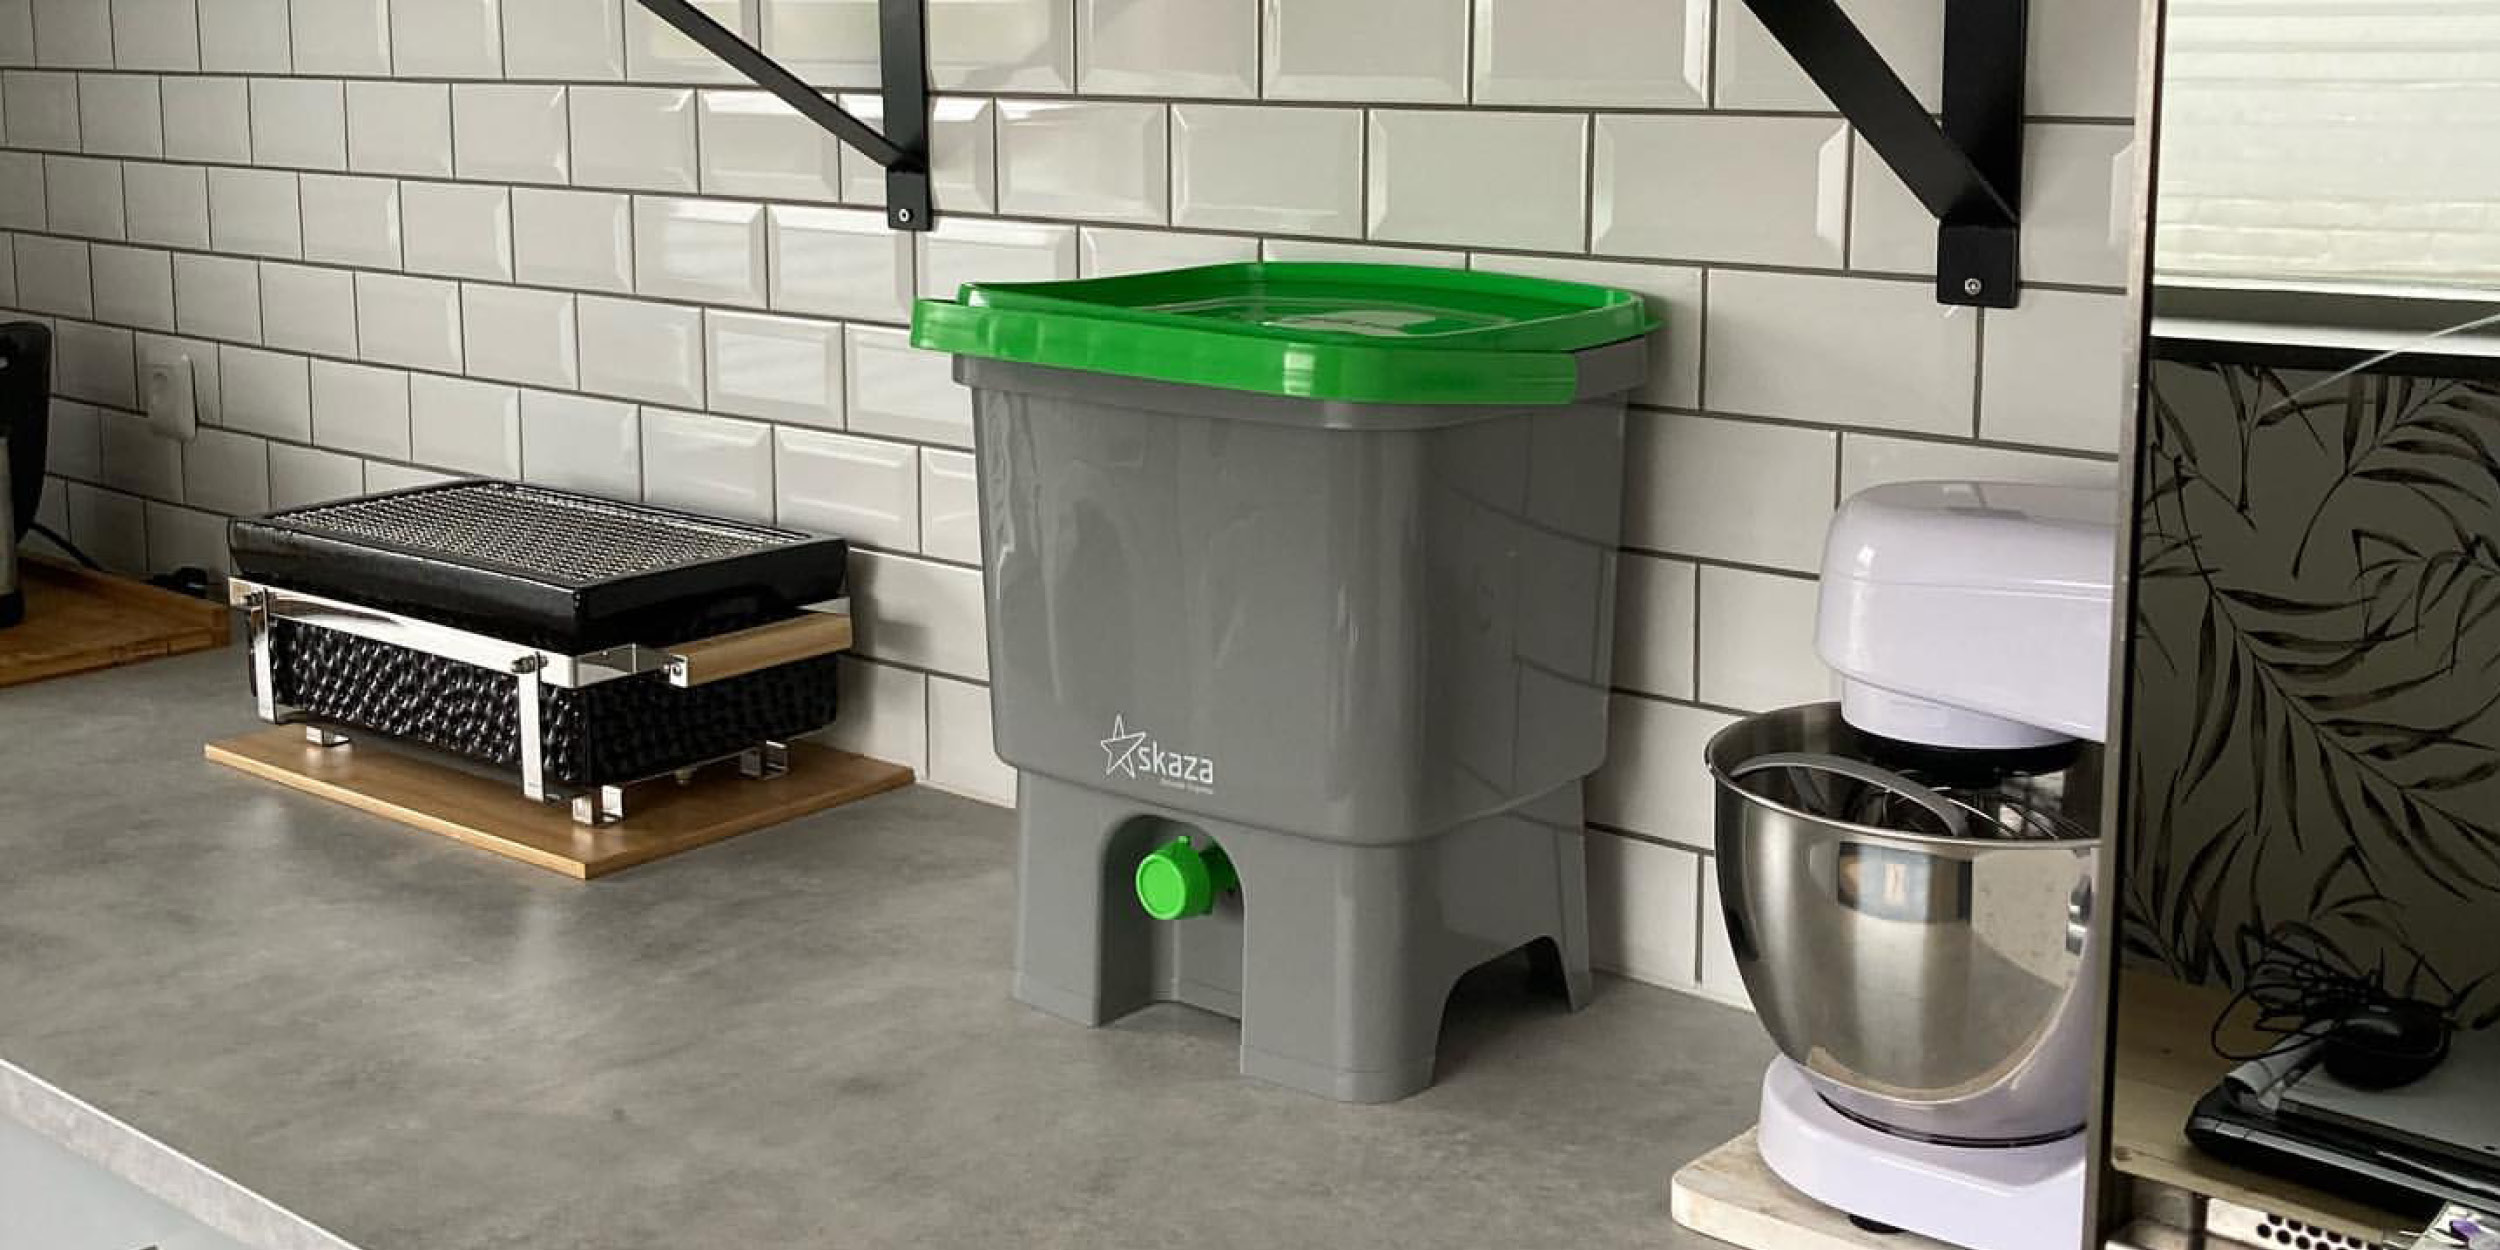 An urban composter is appropriate for apartment living